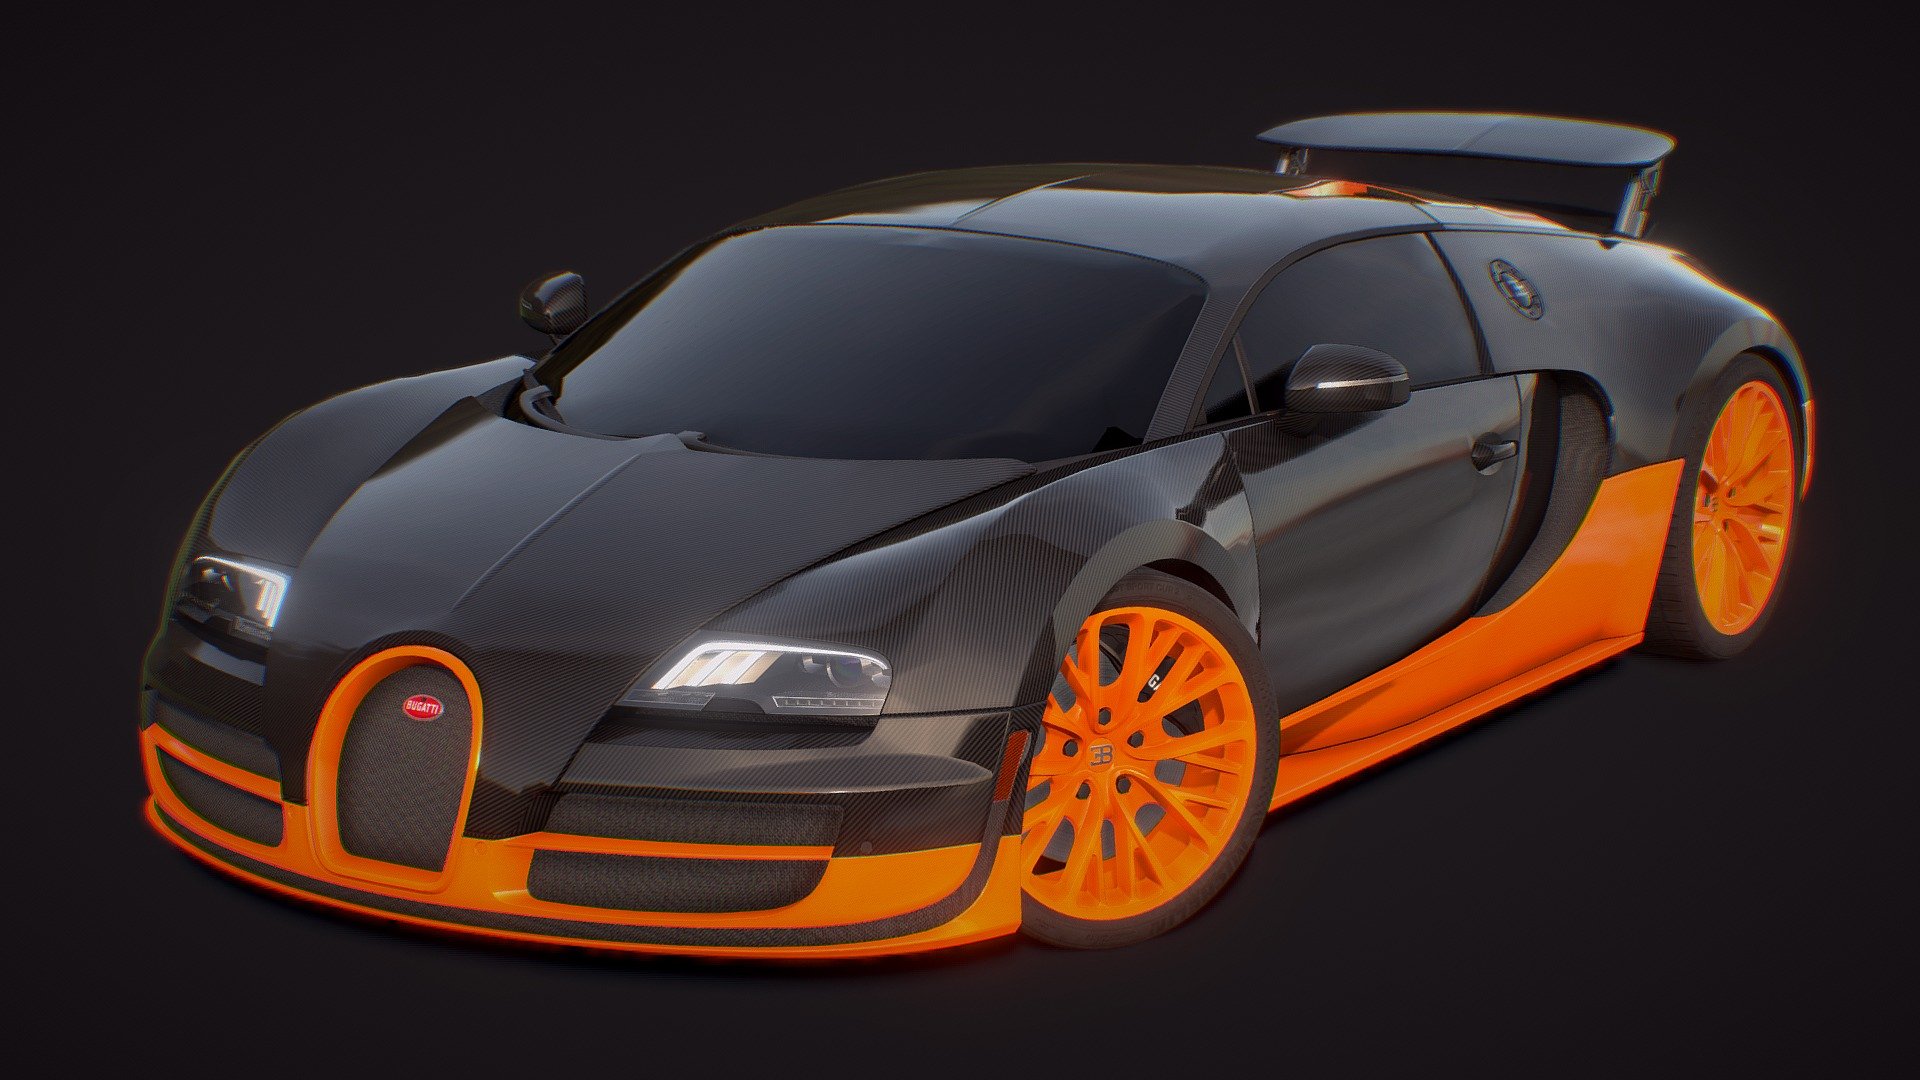 Bugatti Veyron Super Sport - Mid Poly
UV Mapped / Shadder Split / PBR Textured
Game Ready / Unreal Engine / Unity - Directly import with texture maps and start using.
Contact me if you want the non triangulated version or 4k textures of this model - dsaalister@gmail.com
https://www.instagram.com/p/Cdnk5jajFgl/?hl=en - Bugatti Veyron Super Sport - Buy Royalty Free 3D model by Allay Design (@Alister.Dsa) 3d model